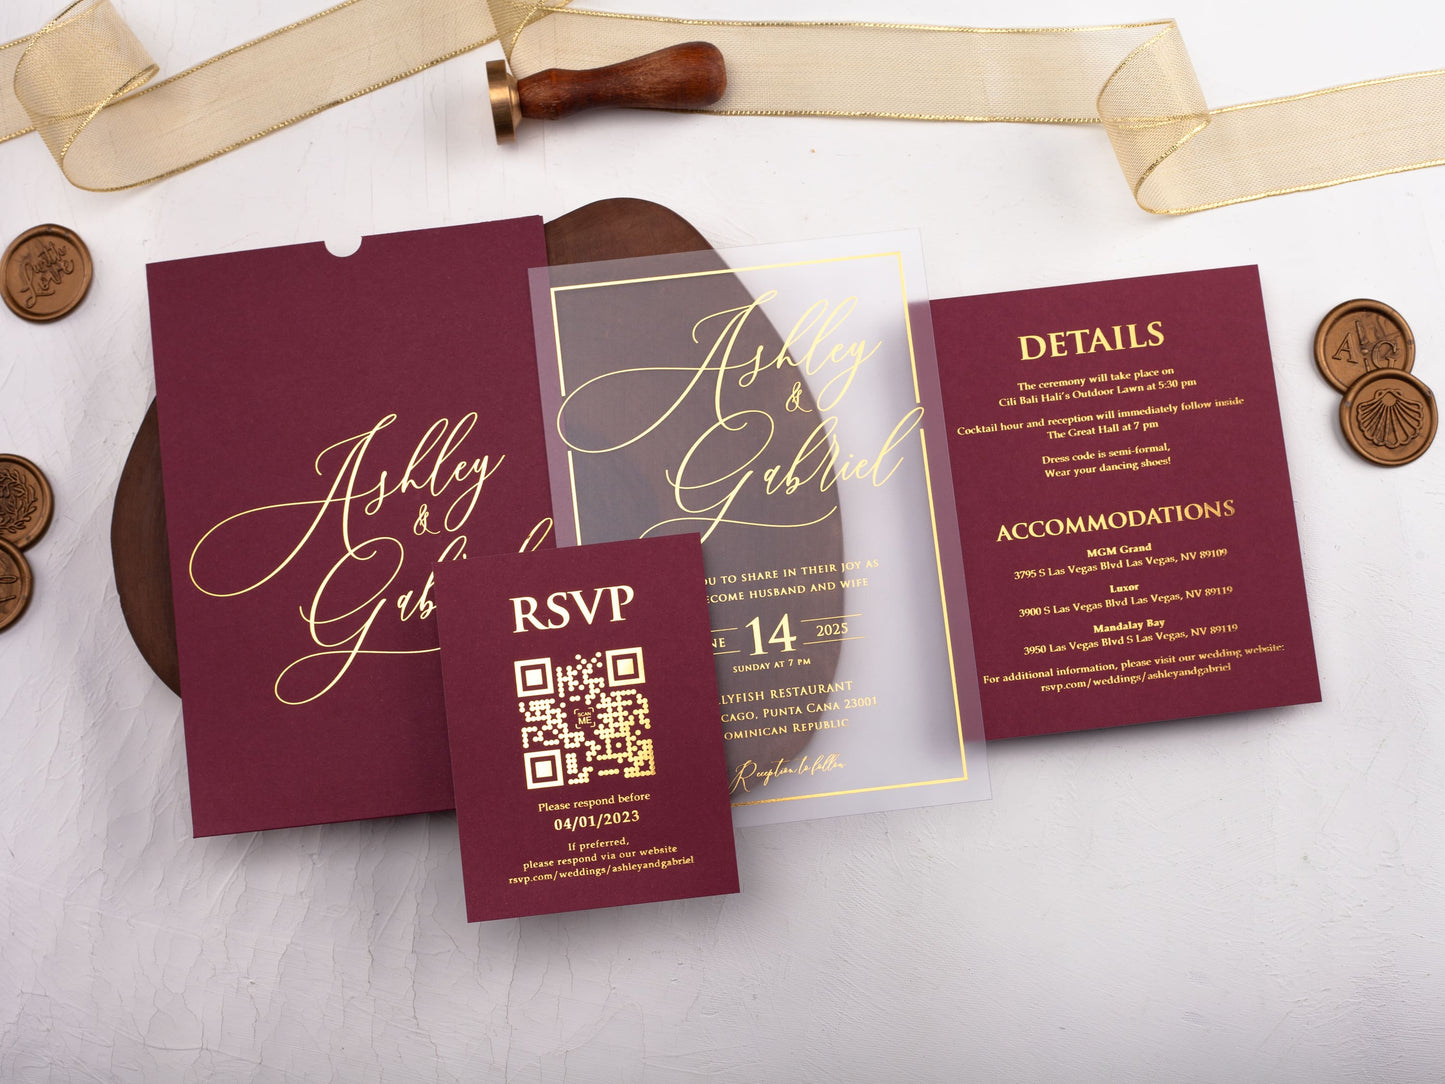 Acrylic Invitation with Gold Foil Print and Burgundy Sleeve Envelope